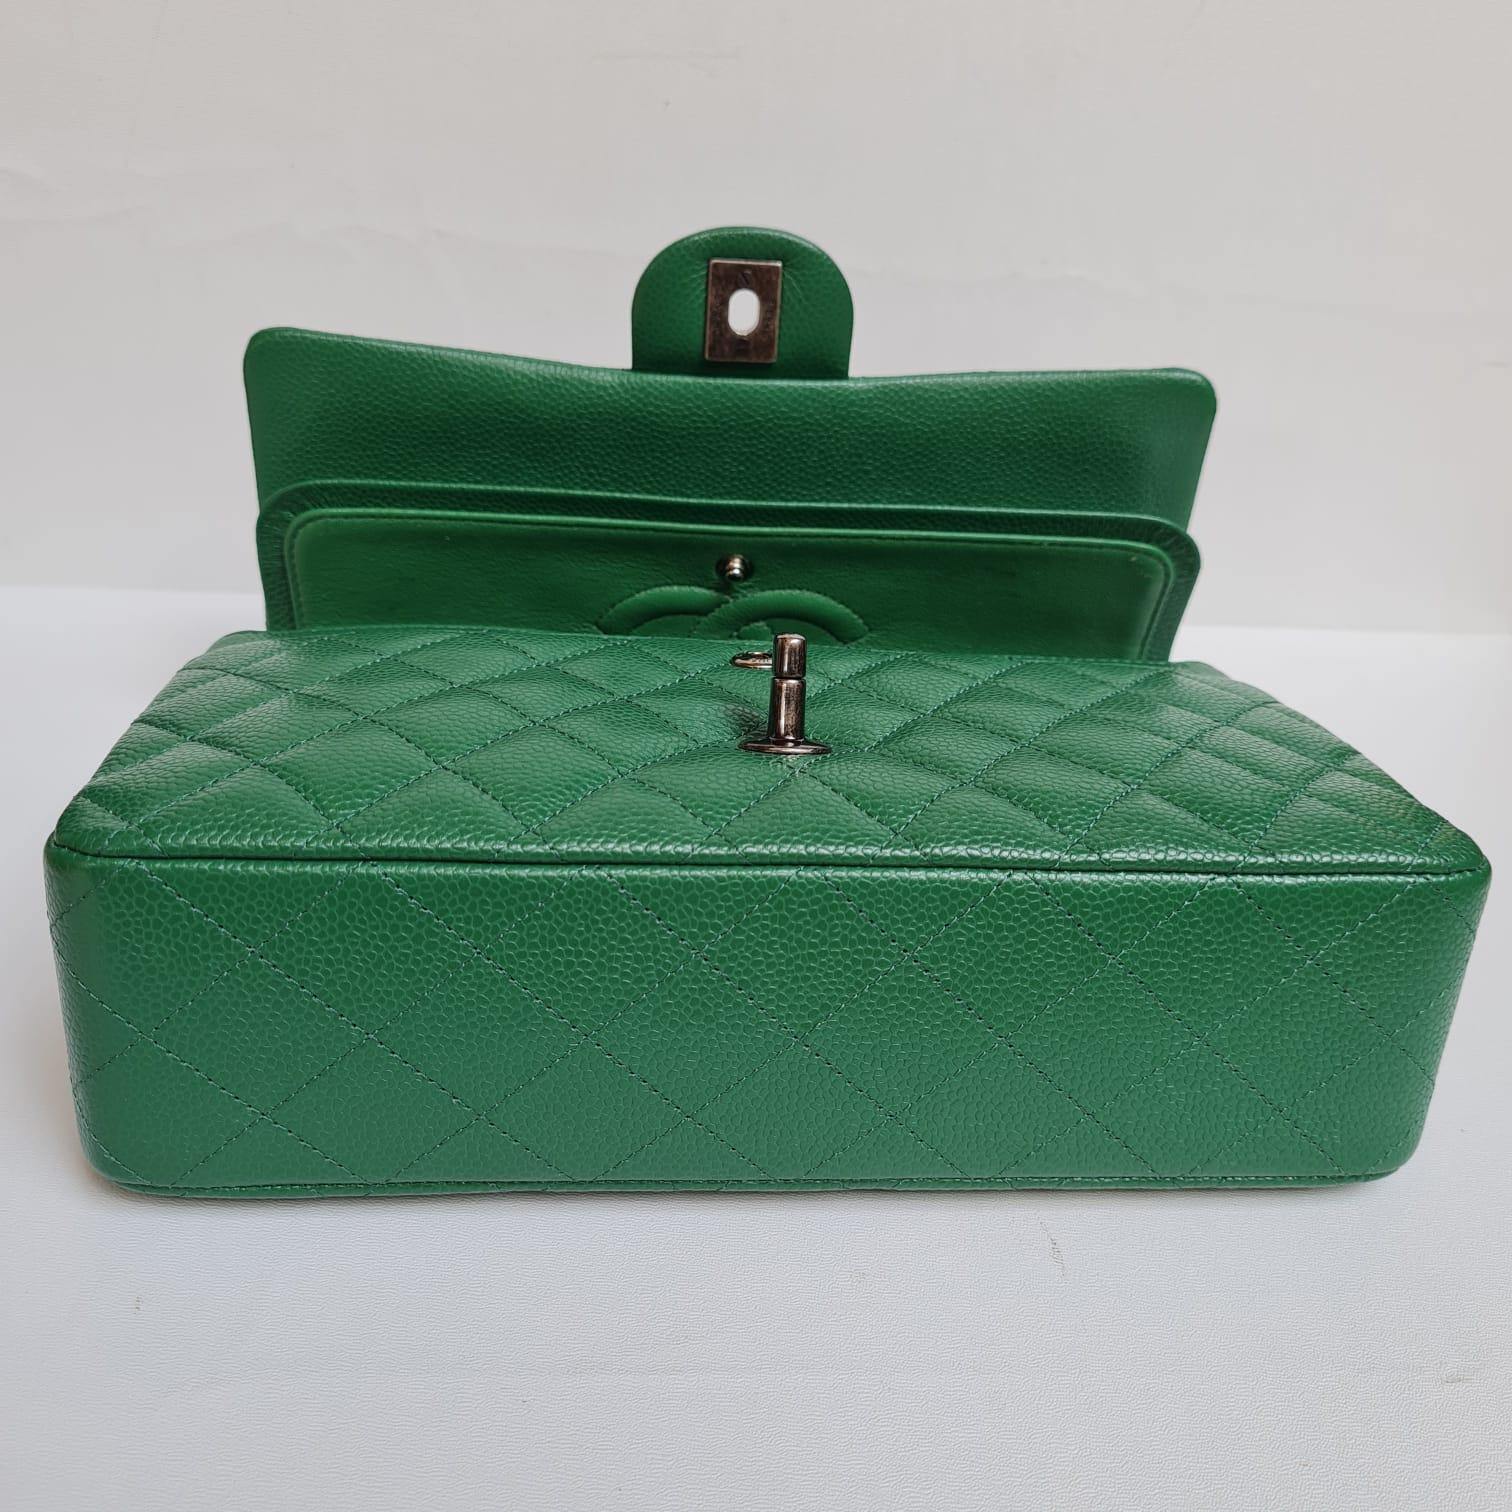 Classic medium in rare emerald green and ruthenium hardware combination. Very rate colorway to come by. Overall still in very good condition. Light marks on the leather flap lining and back pocket. Minor scuffing on the corners. Comes with its card,